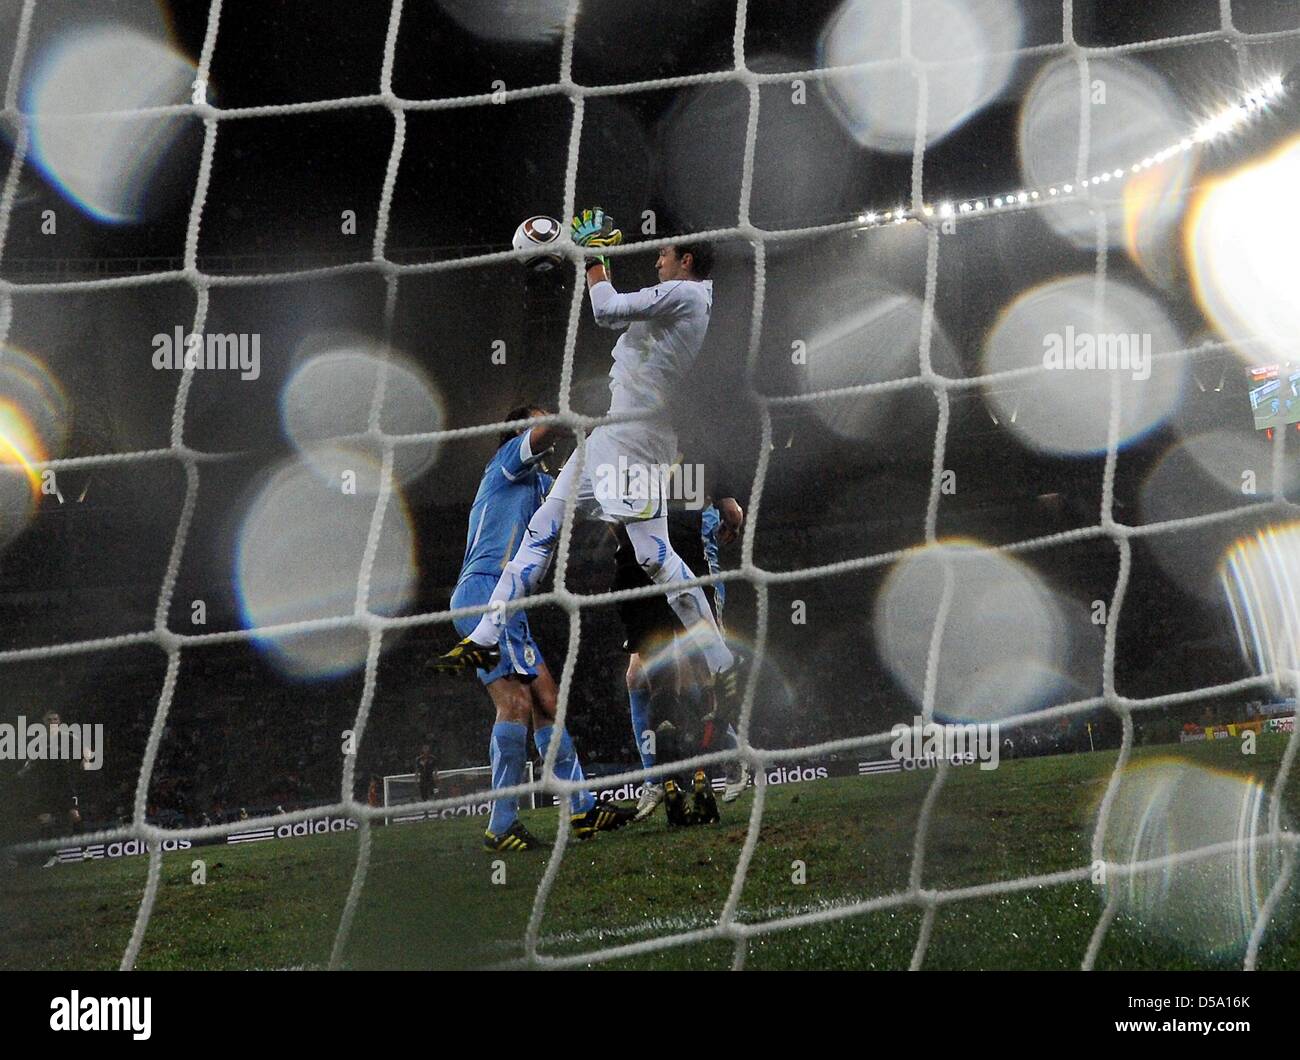 Uruguay's goalkeeper Fernando Muslera (C) goes for the ball during the 2010 FIFA World Cup third place match between Uruguay and Germany at the Nelson Mandela Bay Stadium in Port Elizabeth, South Africa 10 July 2010. Photo: Marcus Brandt dpa - Please refer to http://dpaq.de/FIFA-WM2010-TC  +++(c) dpa - Bildfunk+++ Stock Photo